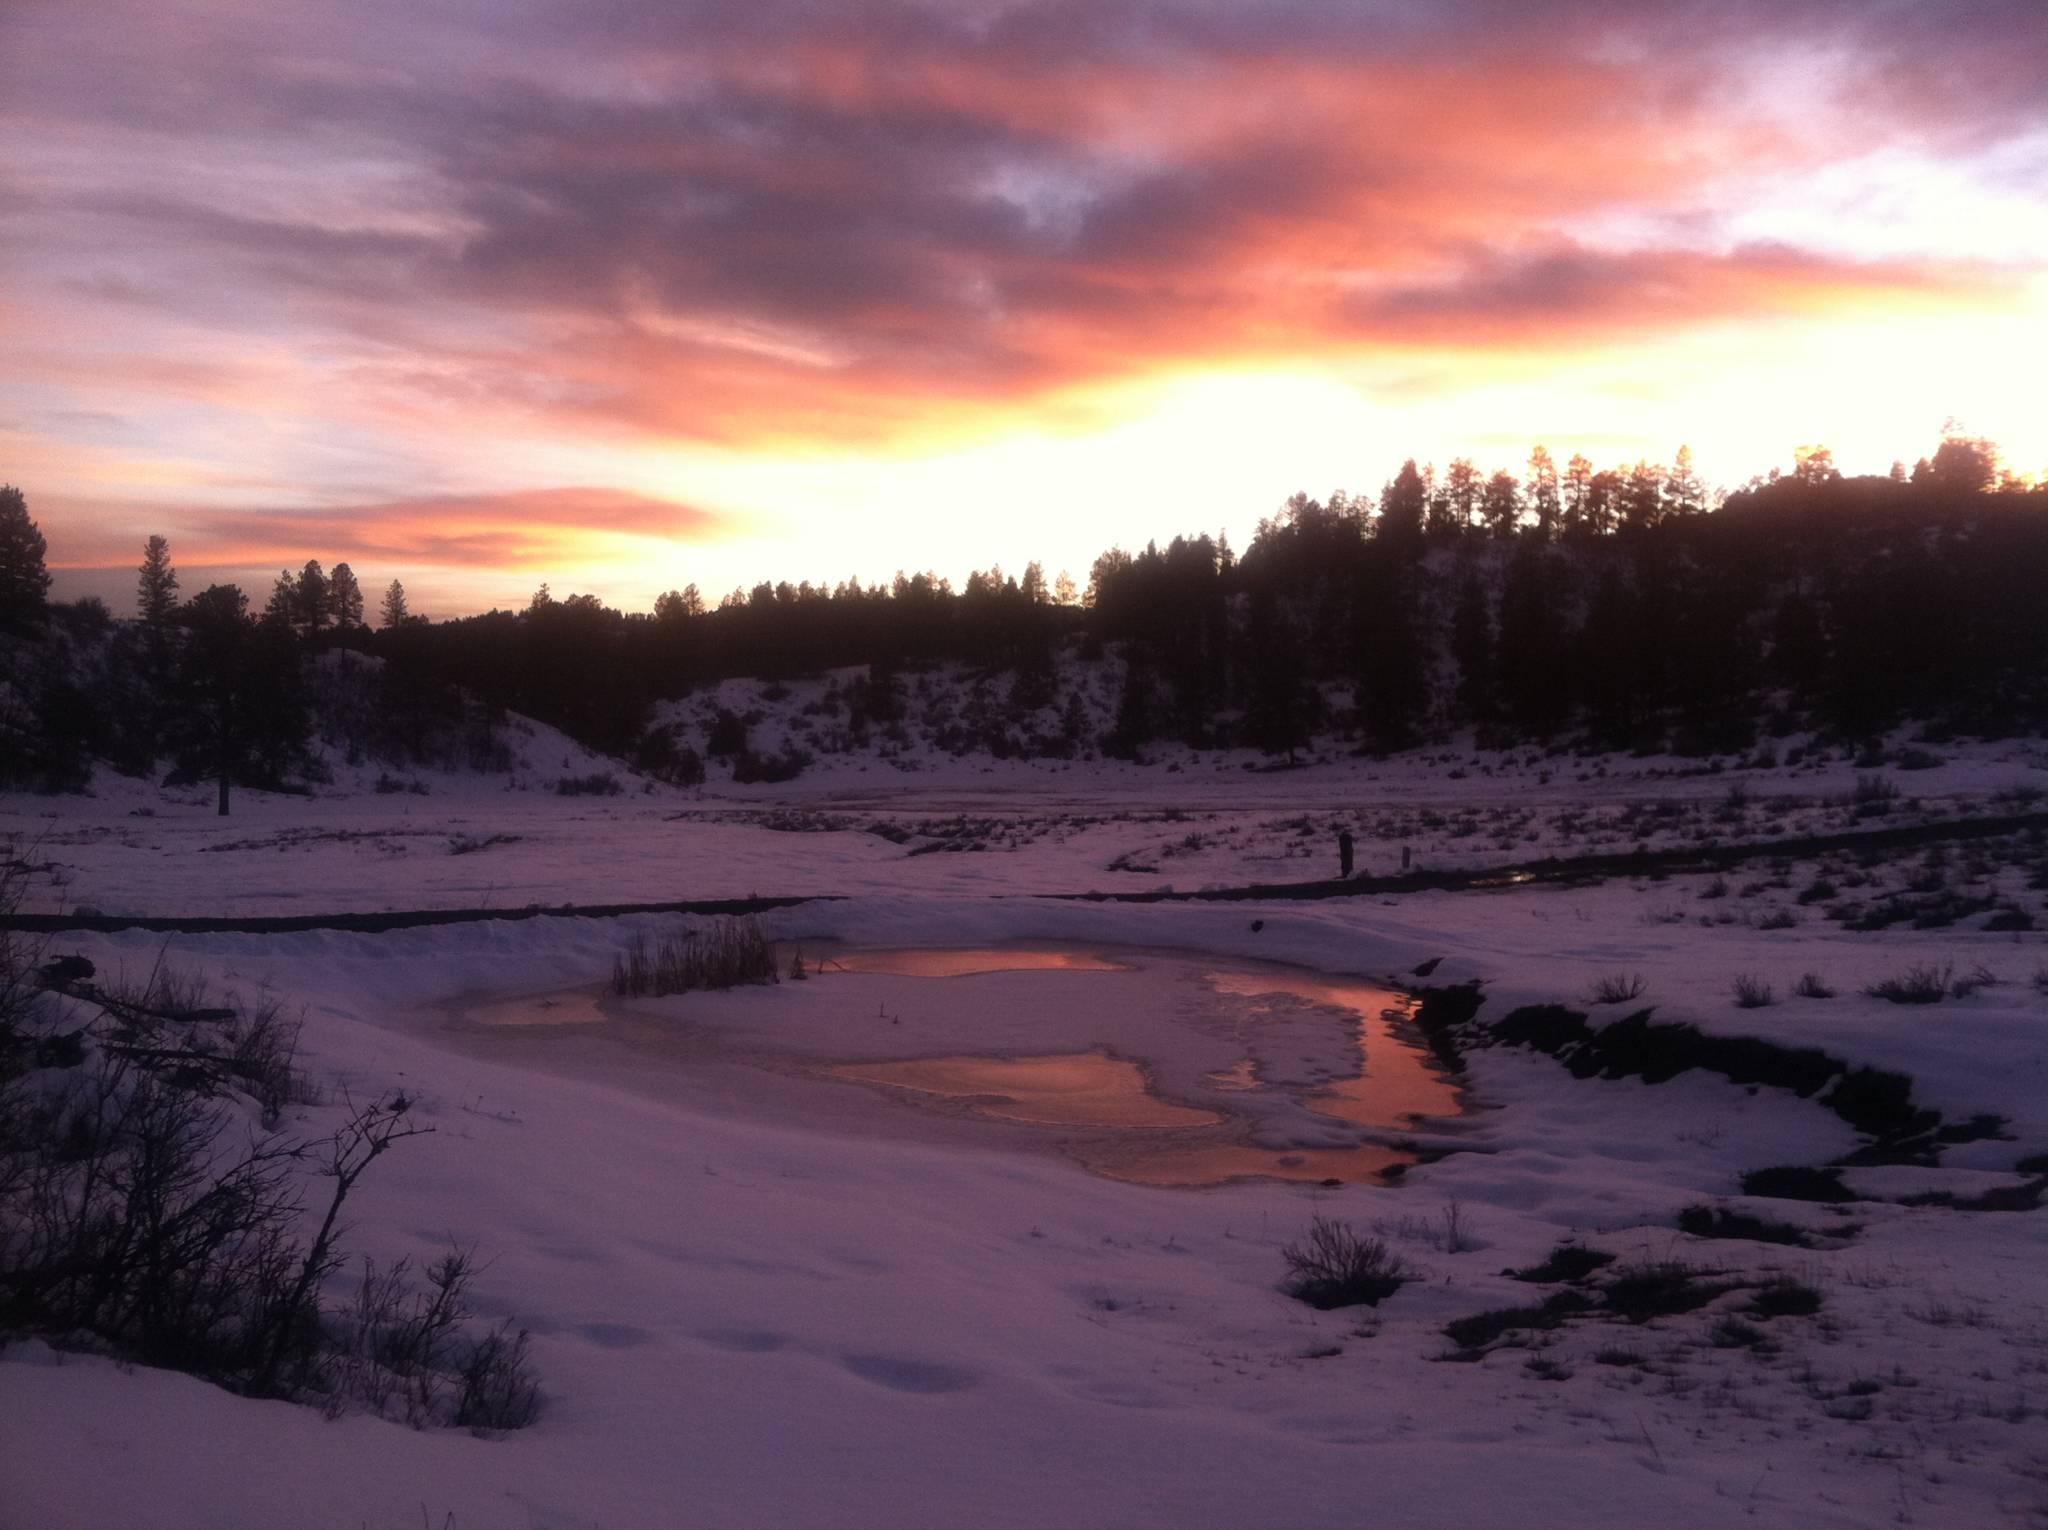 Sunset over a partially frozen pond